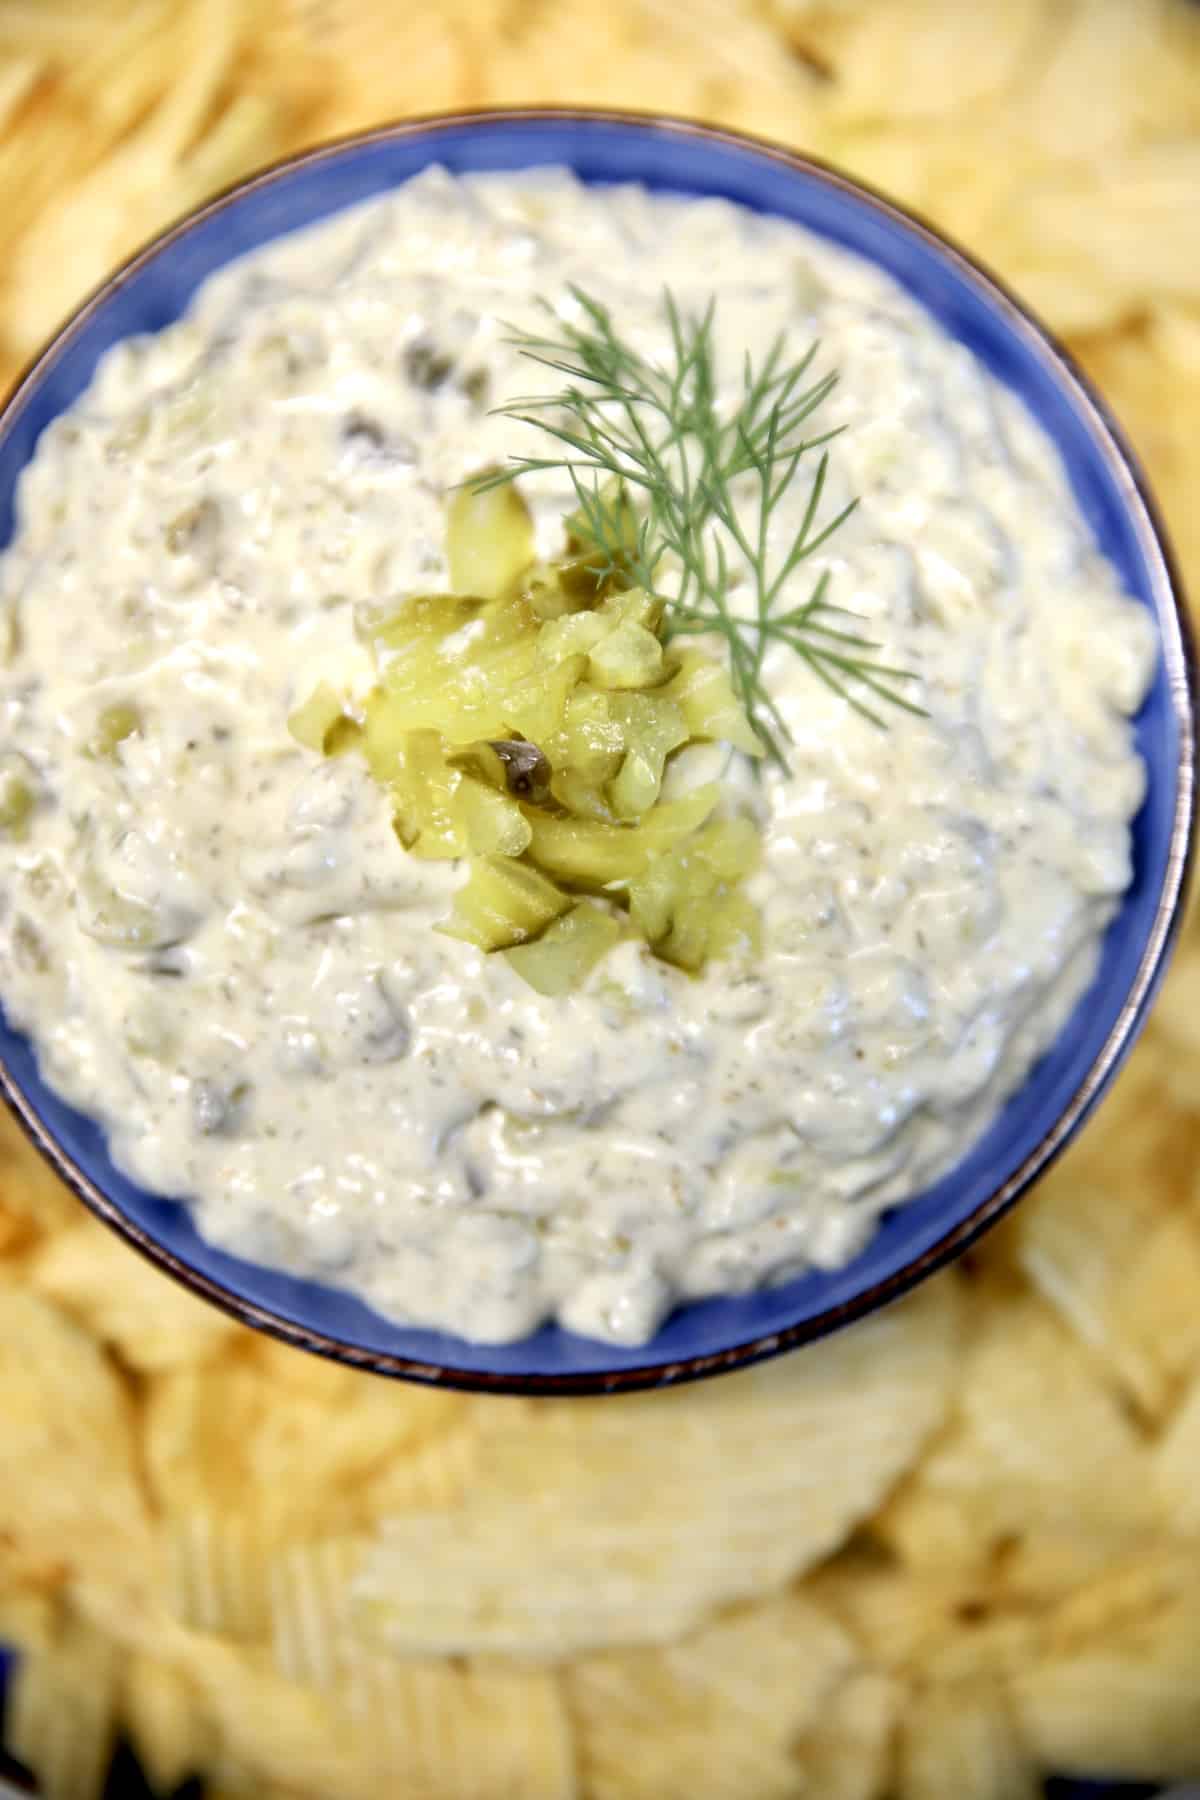 Bowl of pickle dip with dill garnish and potato chips.